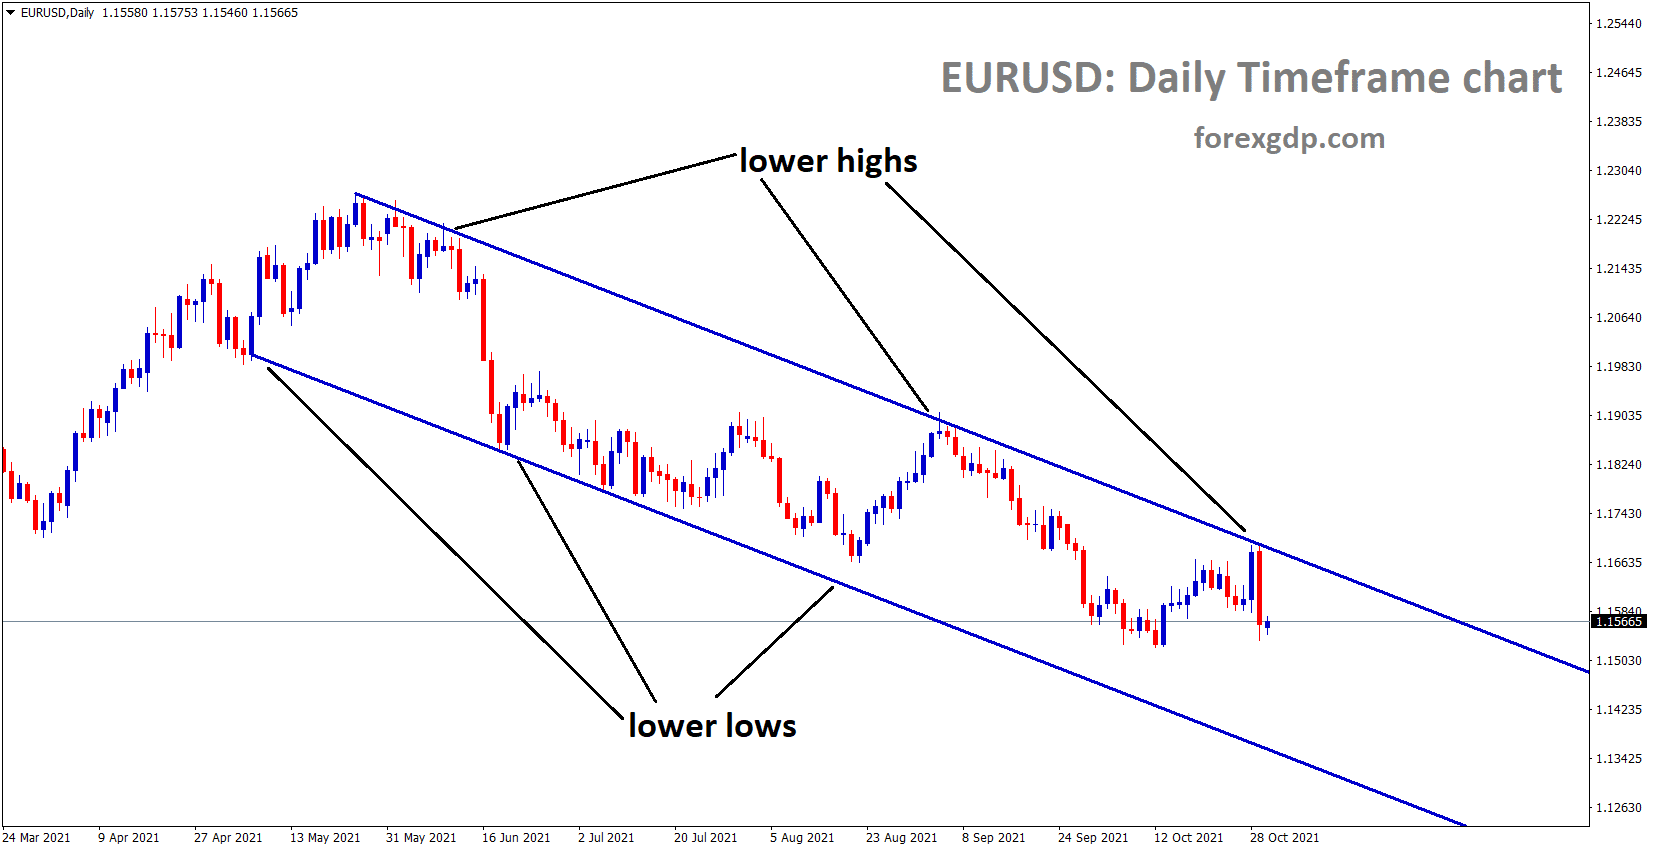 EURUSD is moving in the Descending channel and fell from the lowerhigh area